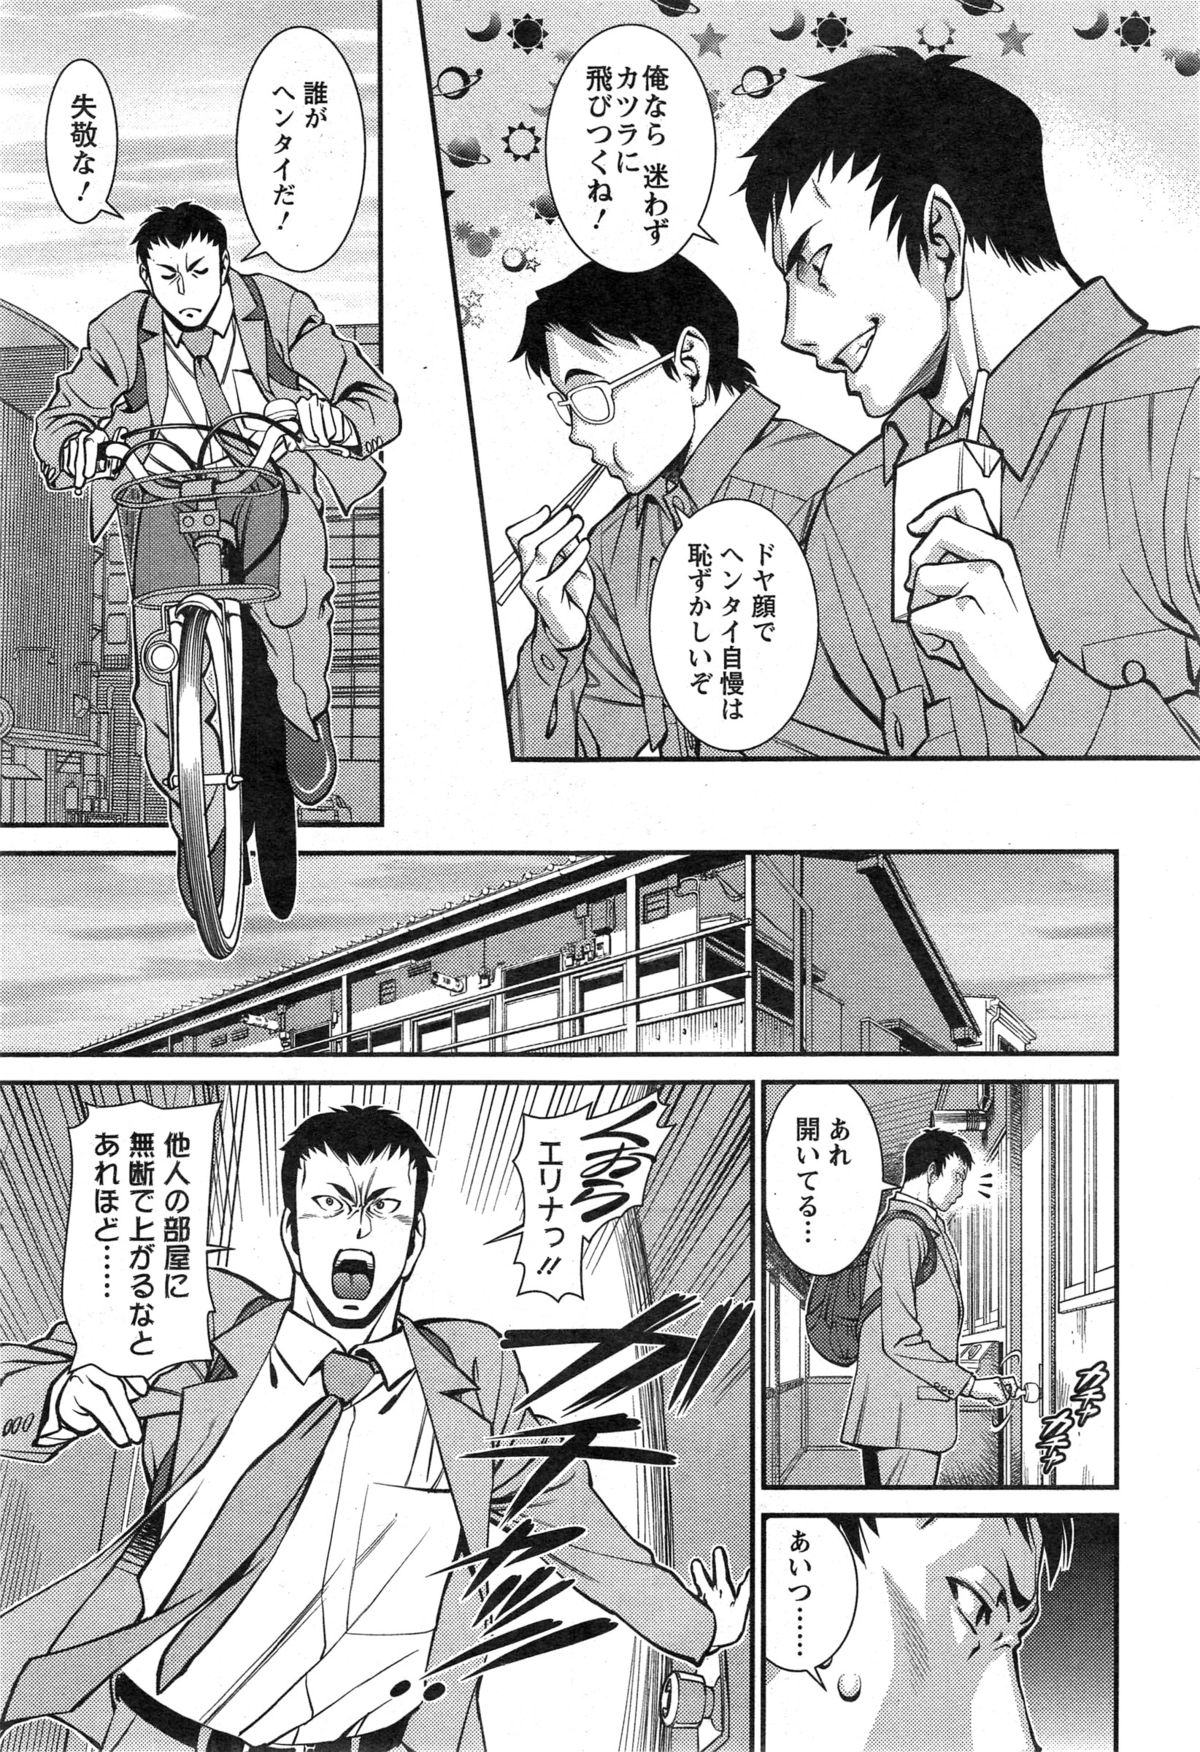 Action Pizazz DX 2014-12 page 45 full